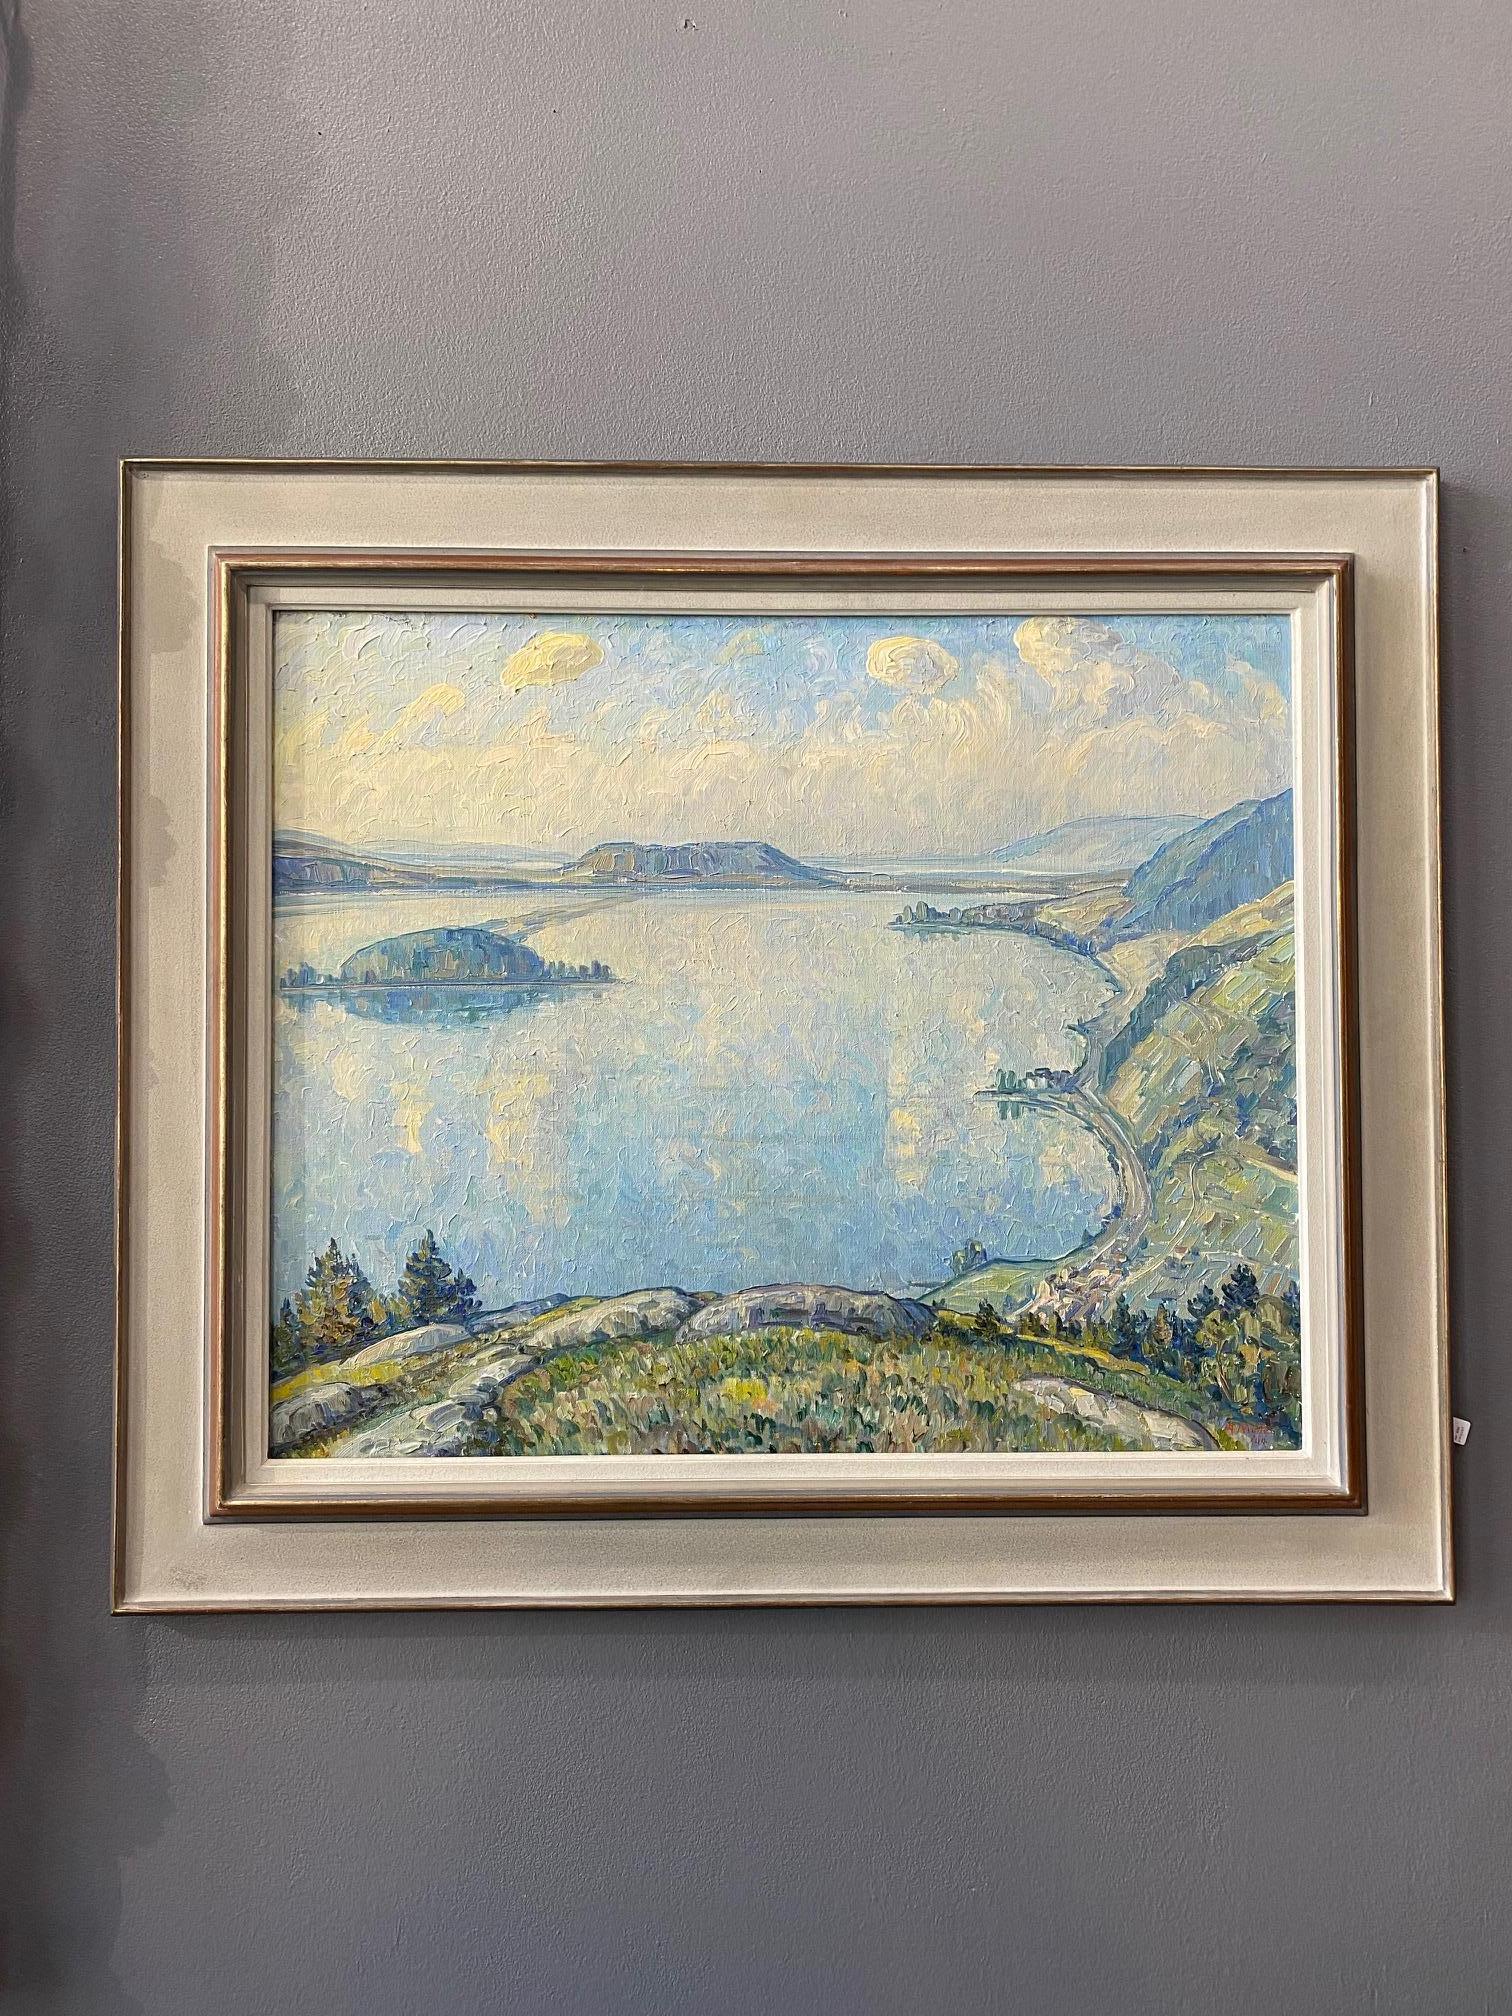 Lake view by A. Muller - Oil on canvas 60x73 cm - Painting by A. Müller